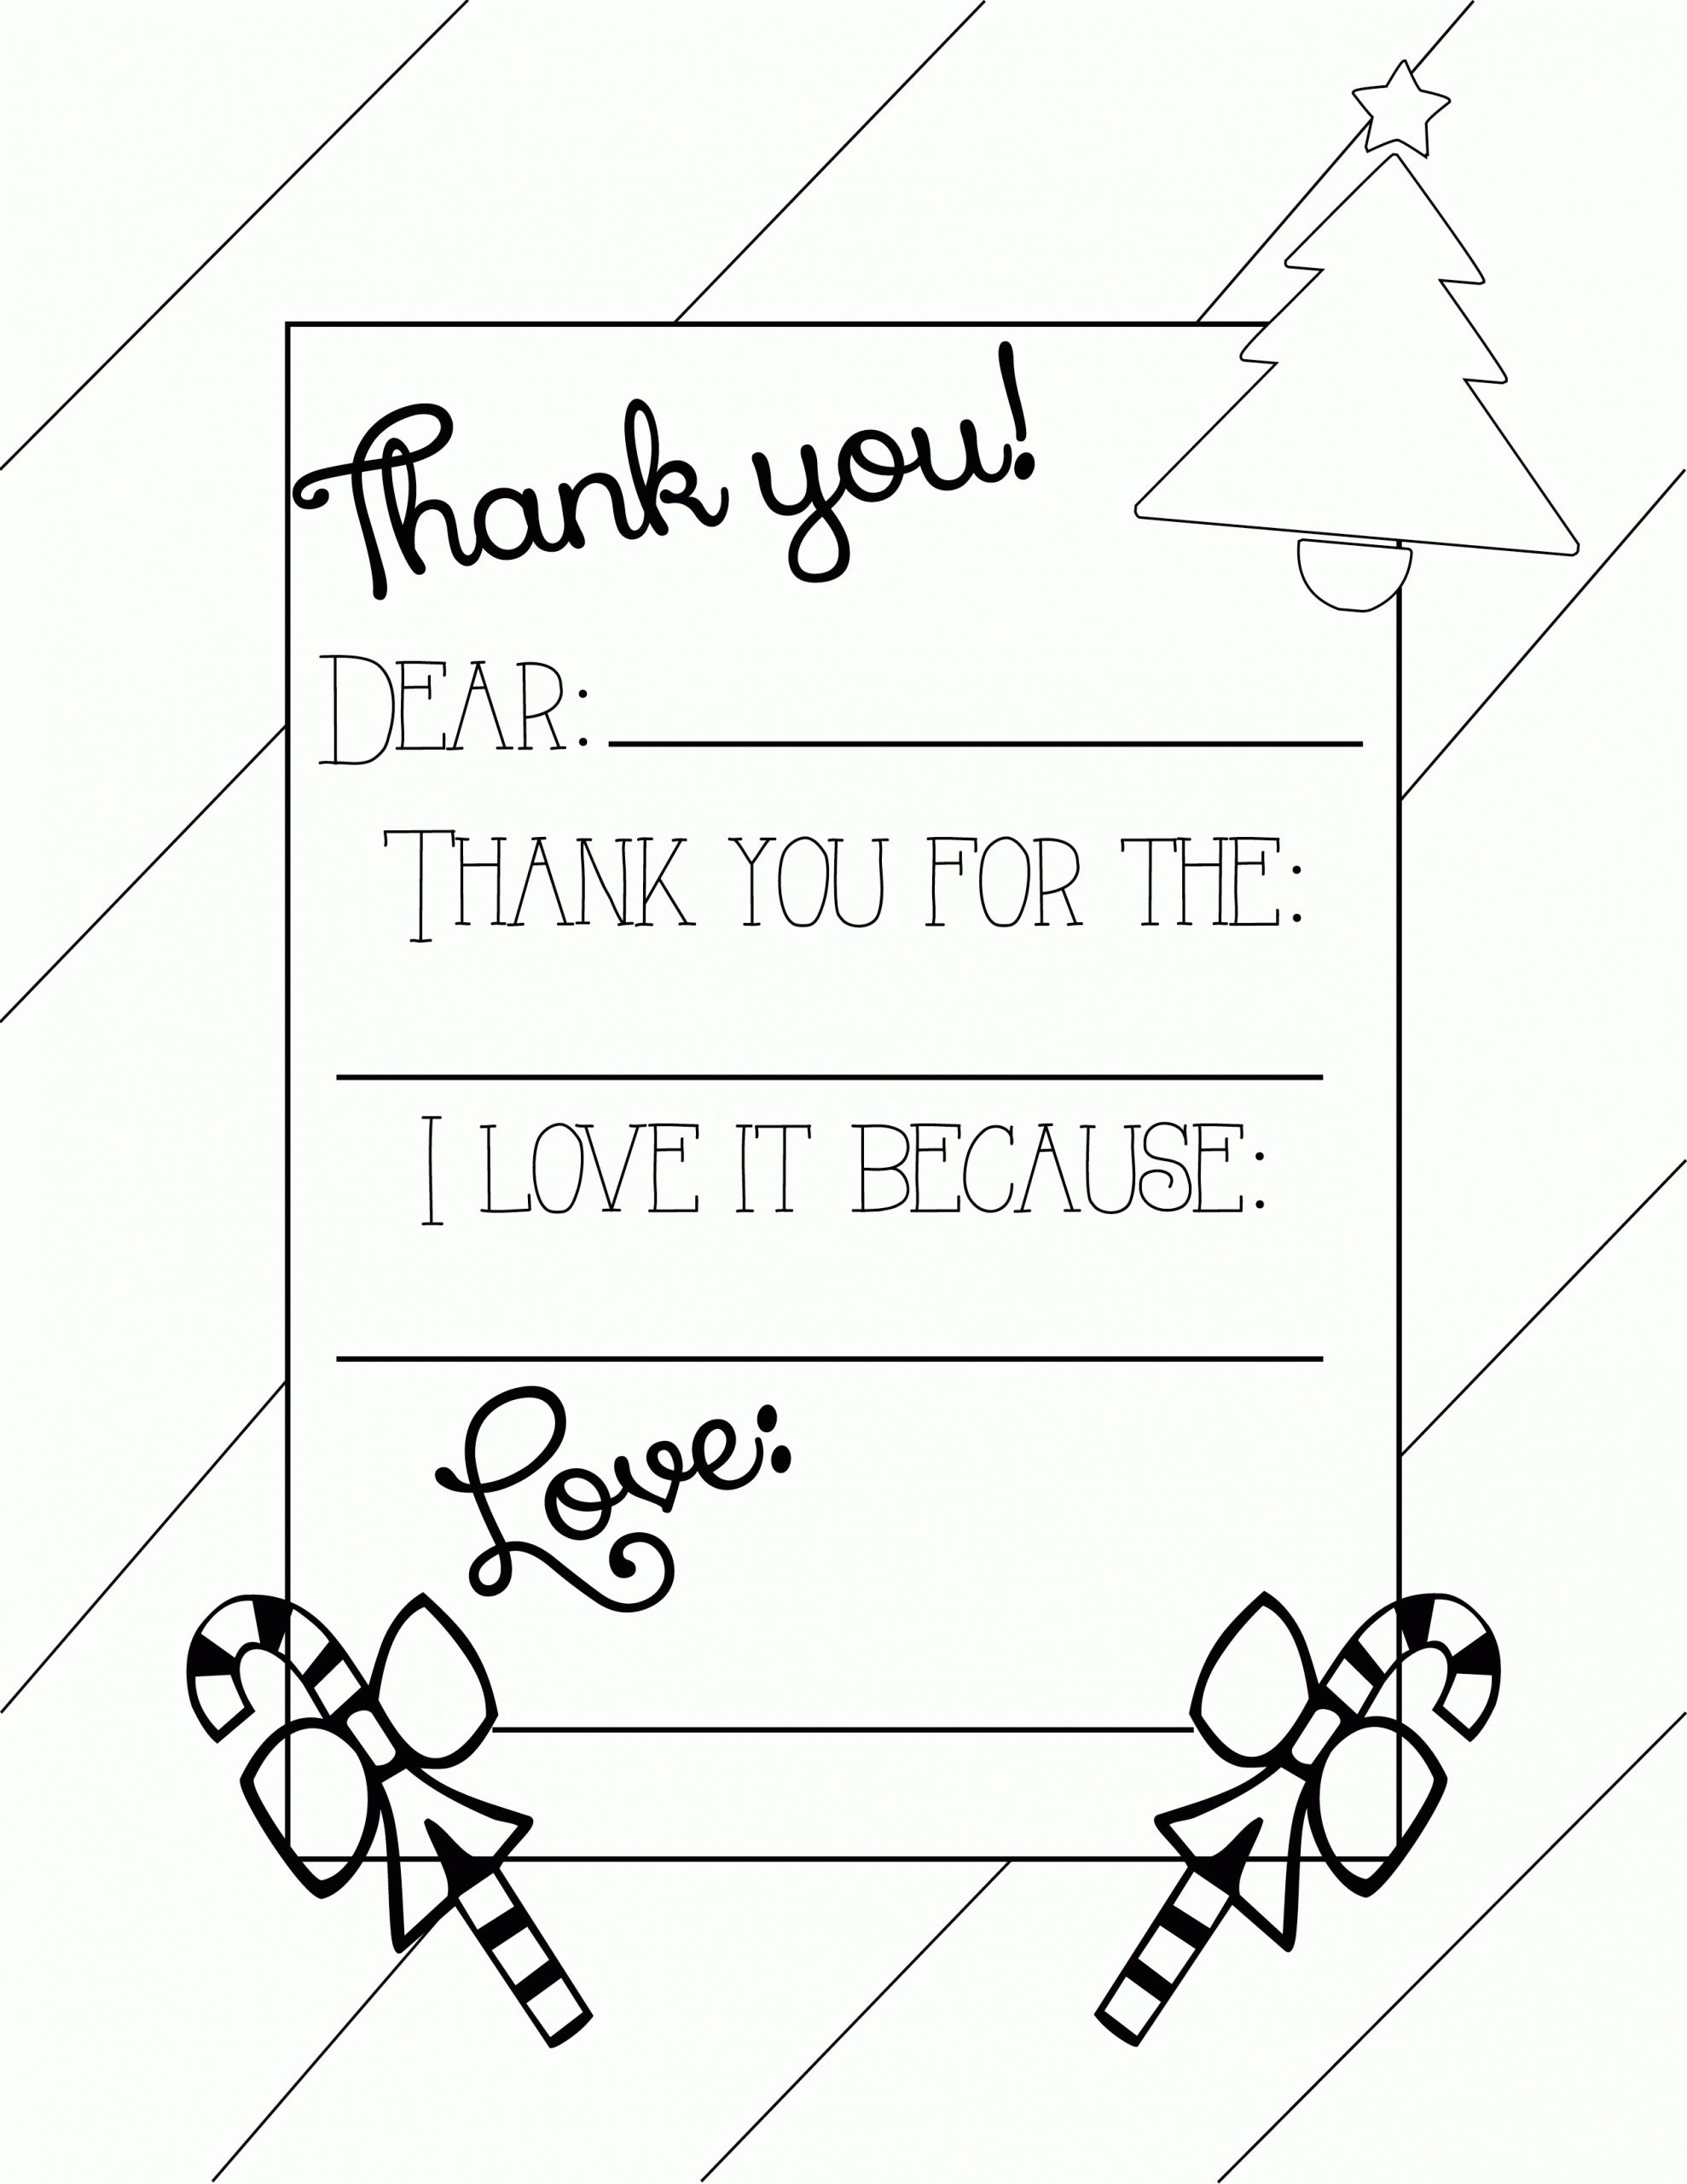 Coloring Pages : Coloring Printable Pages Thank You Cards Inside Thank You Card For Teacher Template